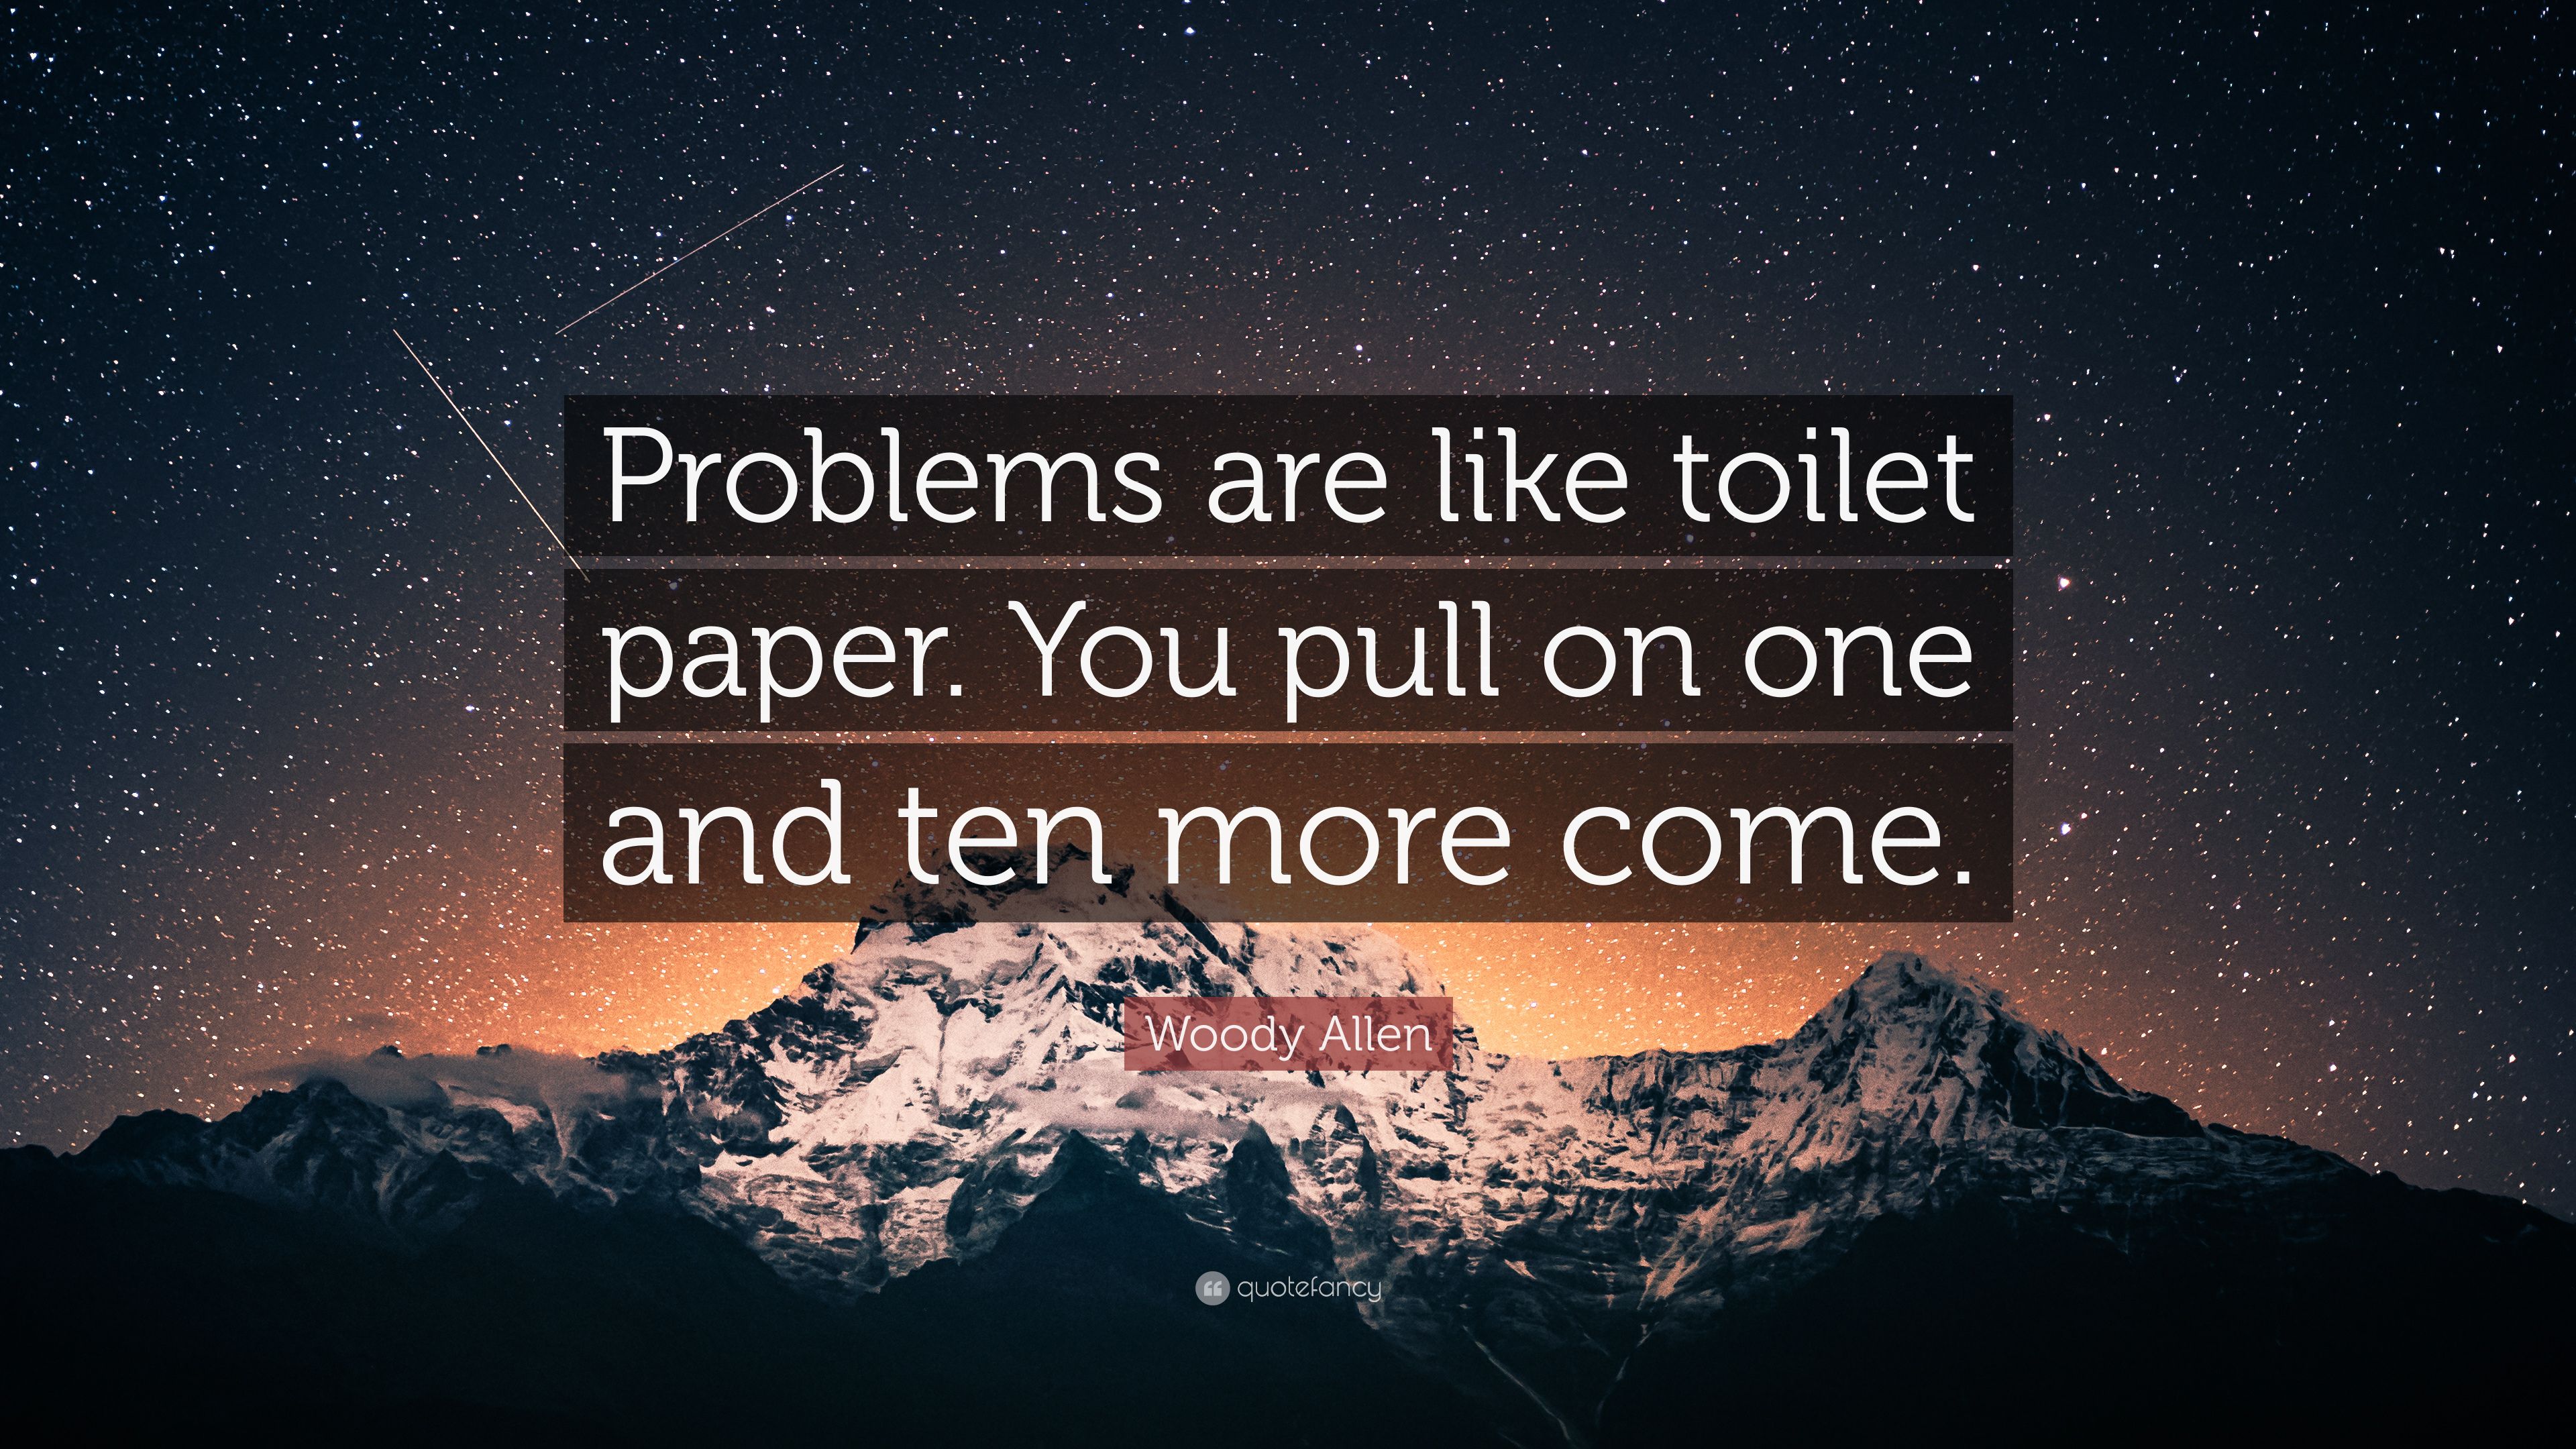 Woody Allen Quote: “Problems are like toilet paper. You pull on one